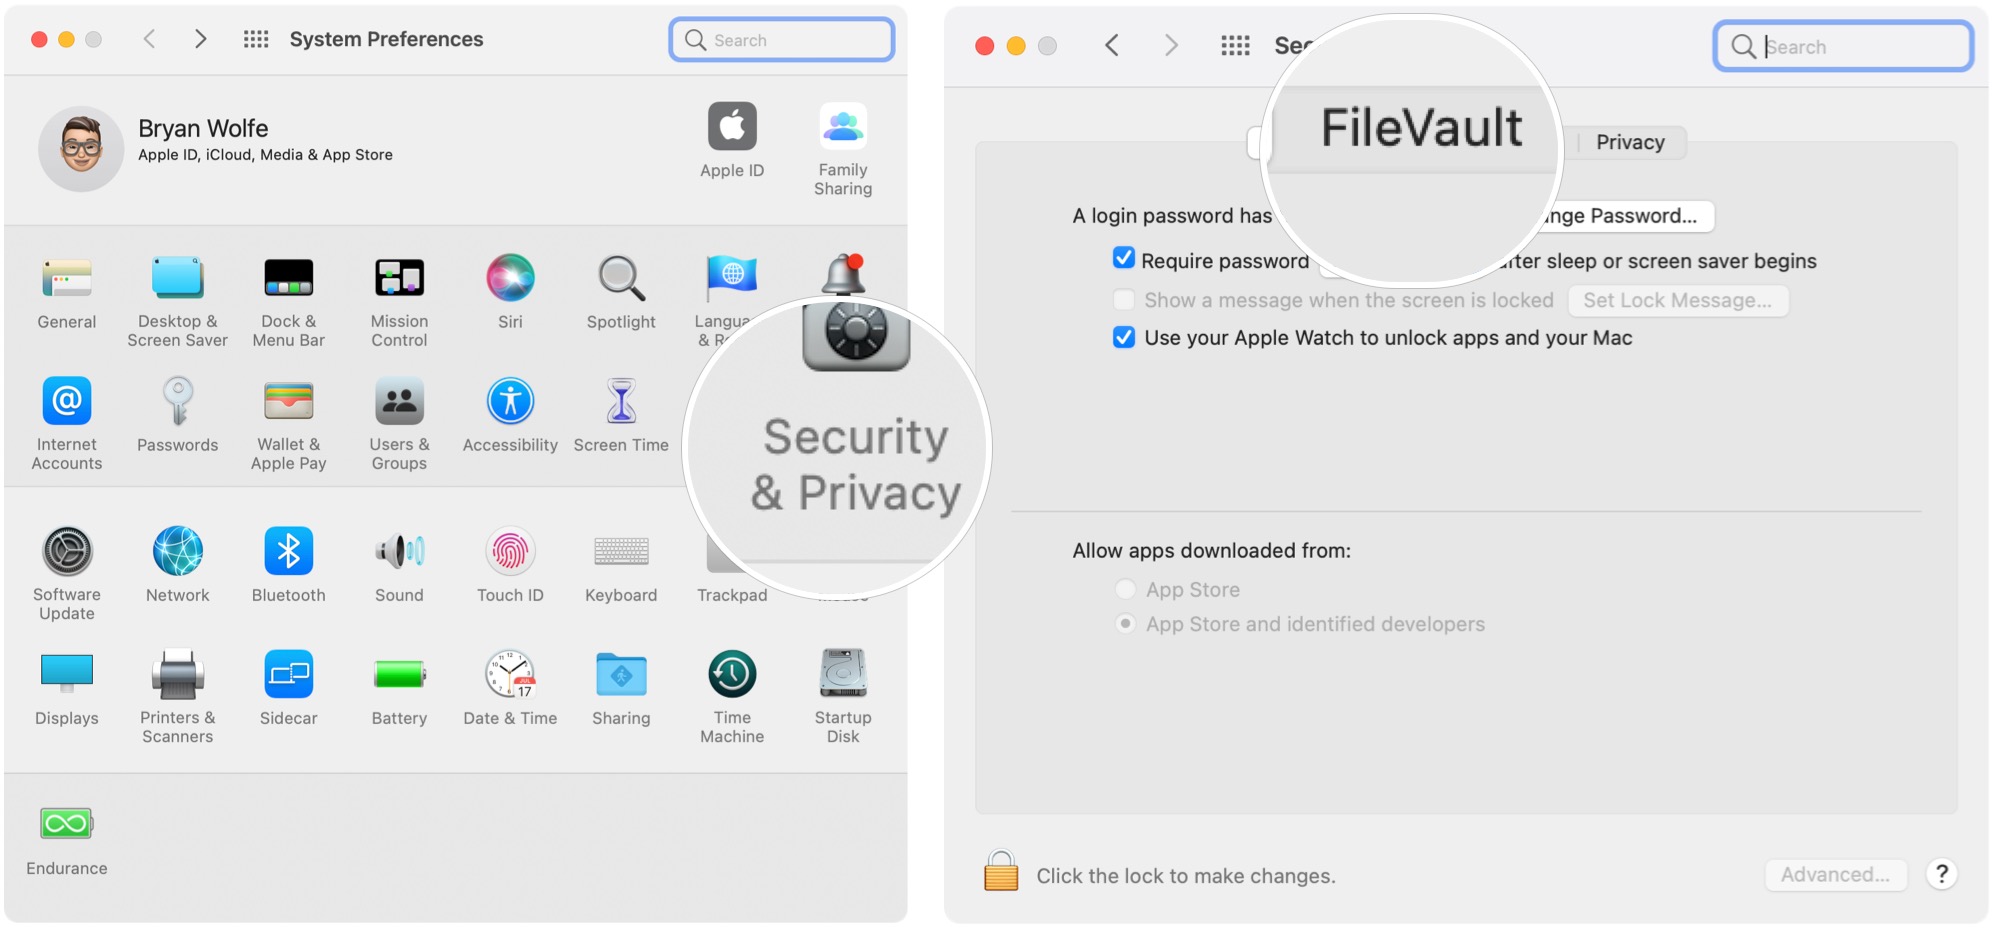 To encypt with FileVault, go into the System Preferences on your Mac, then click Security & Privacy. Choose the FileVault tab.